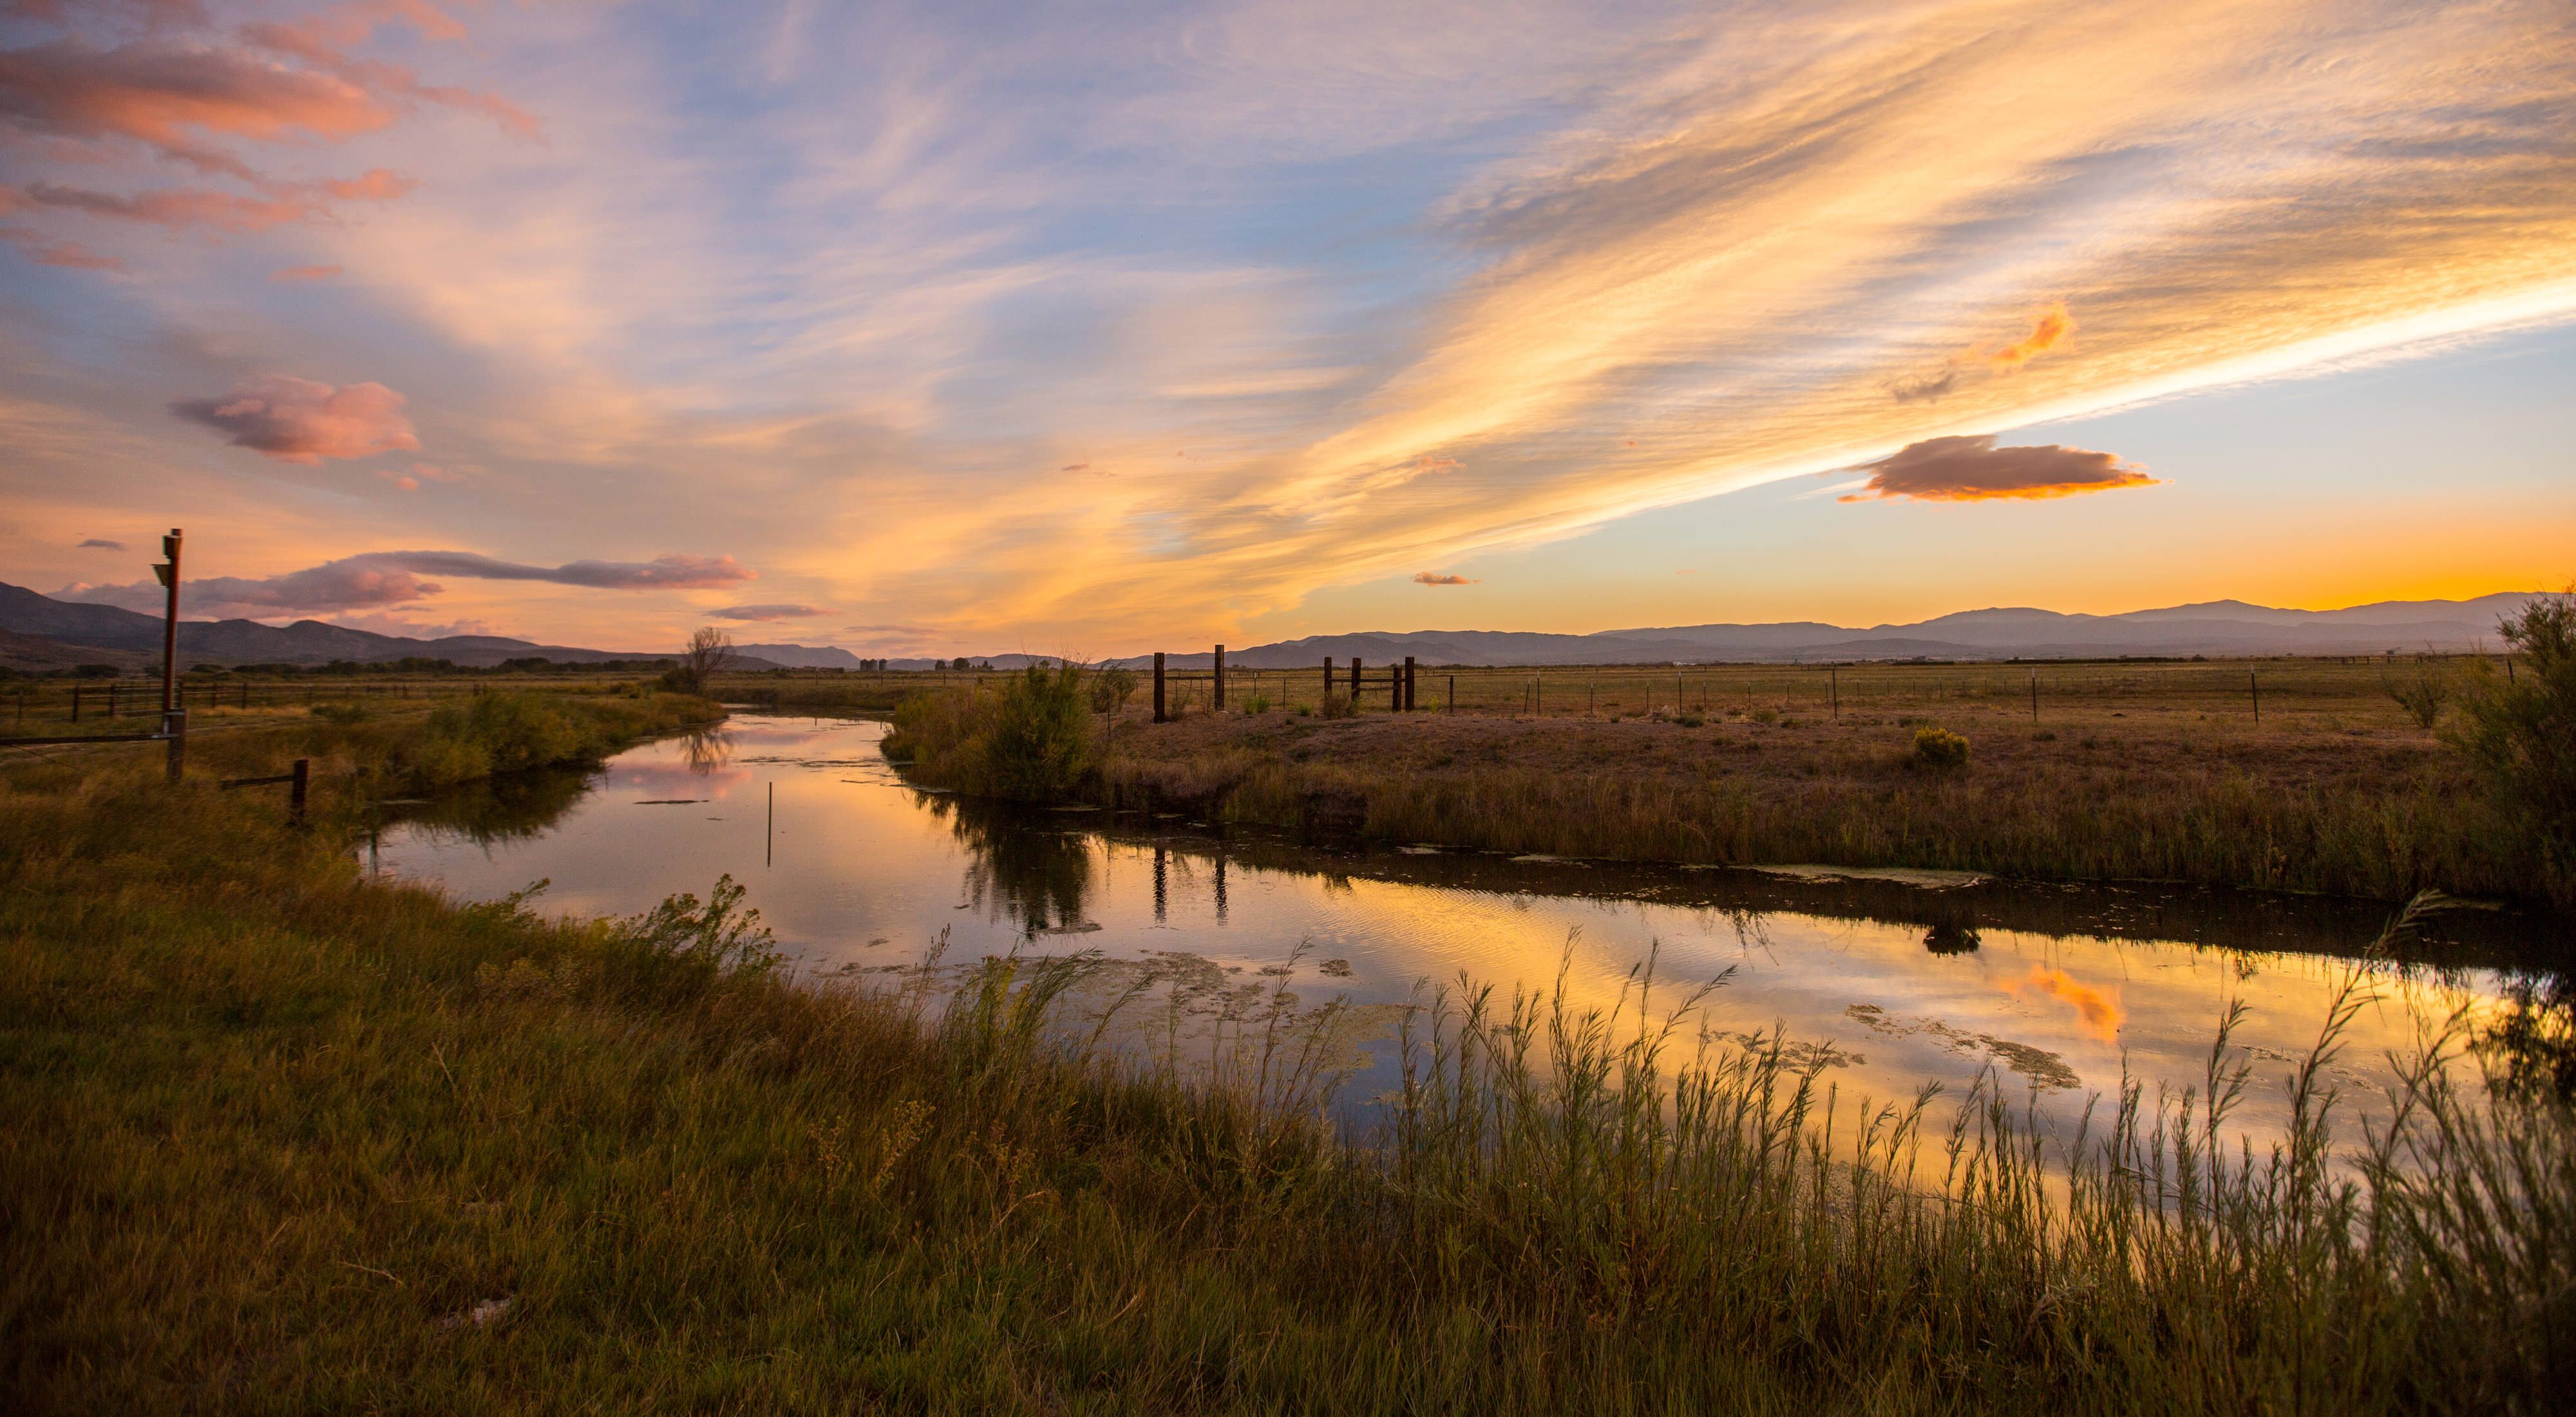 Sunset and clouds over a river running through grassy fields.